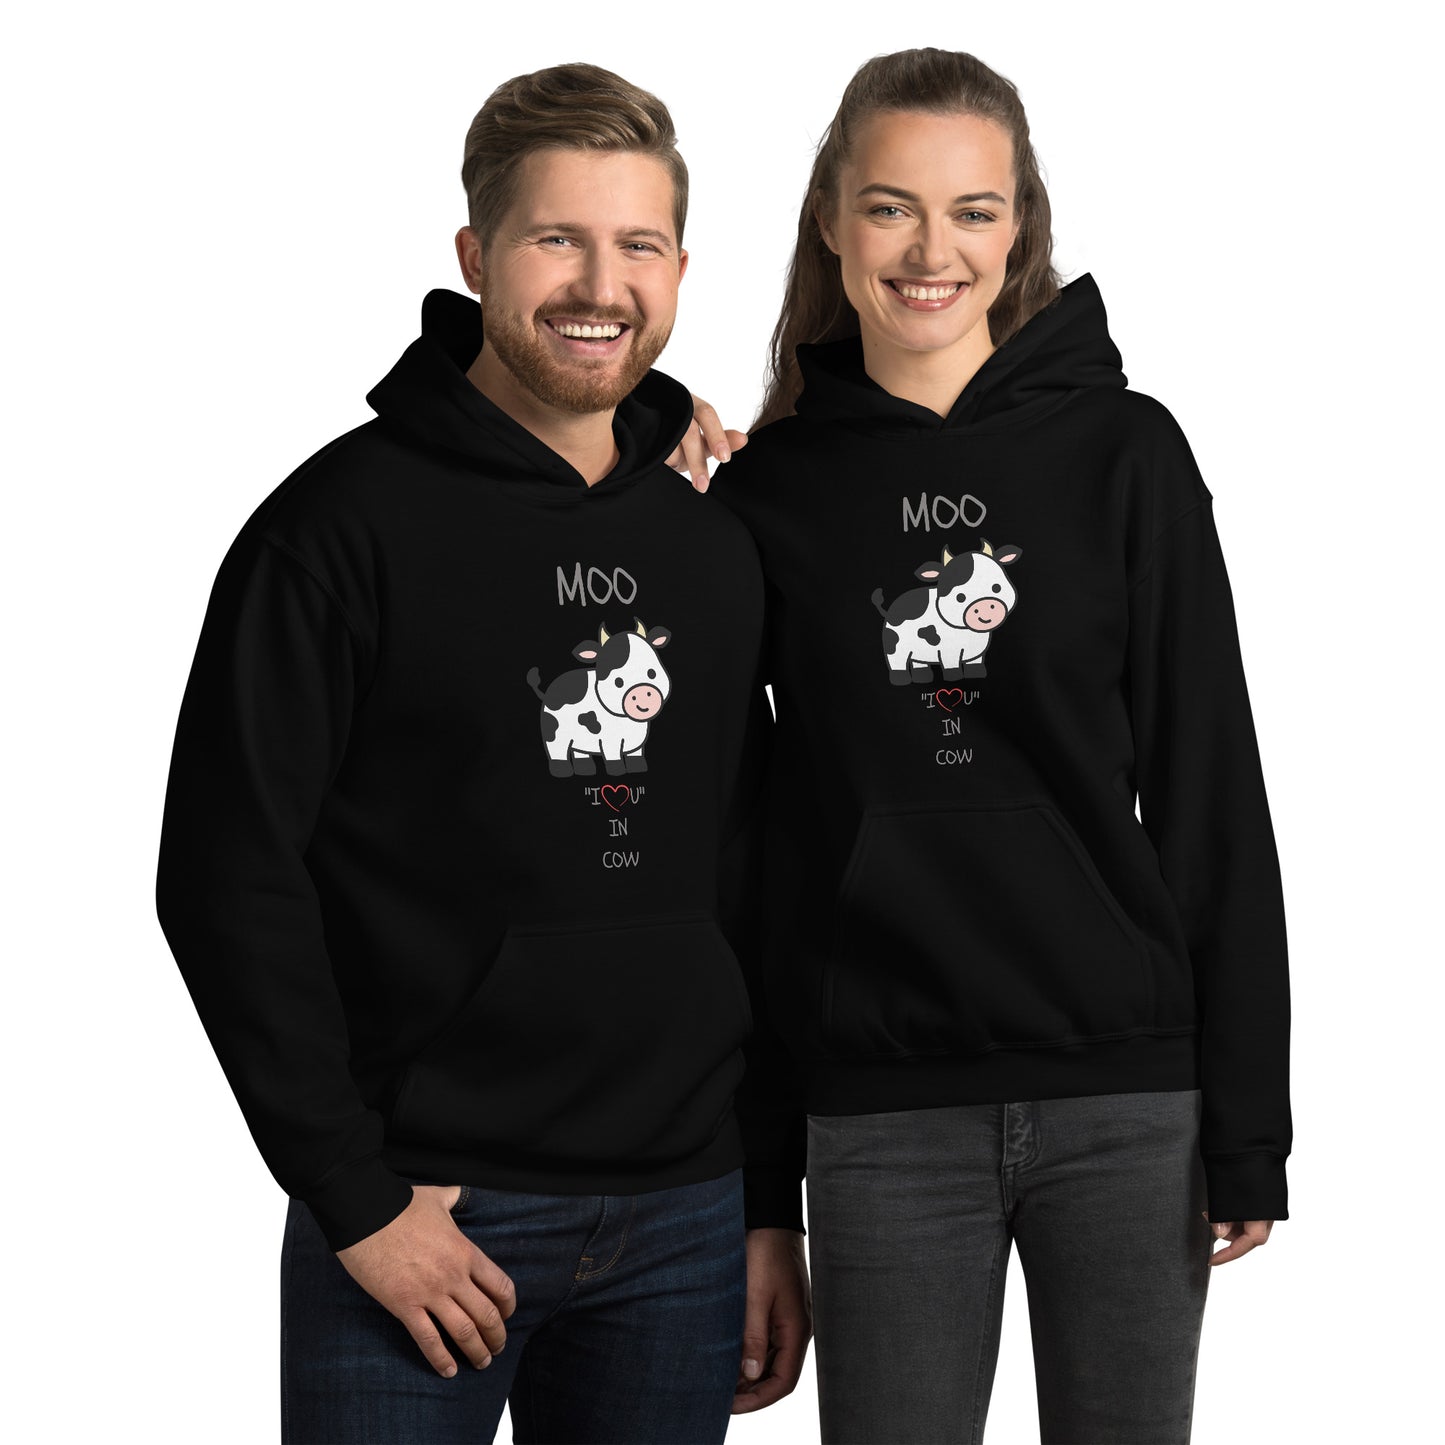 MOO "I LOVE YOU" IN COW Unisex Hoodie